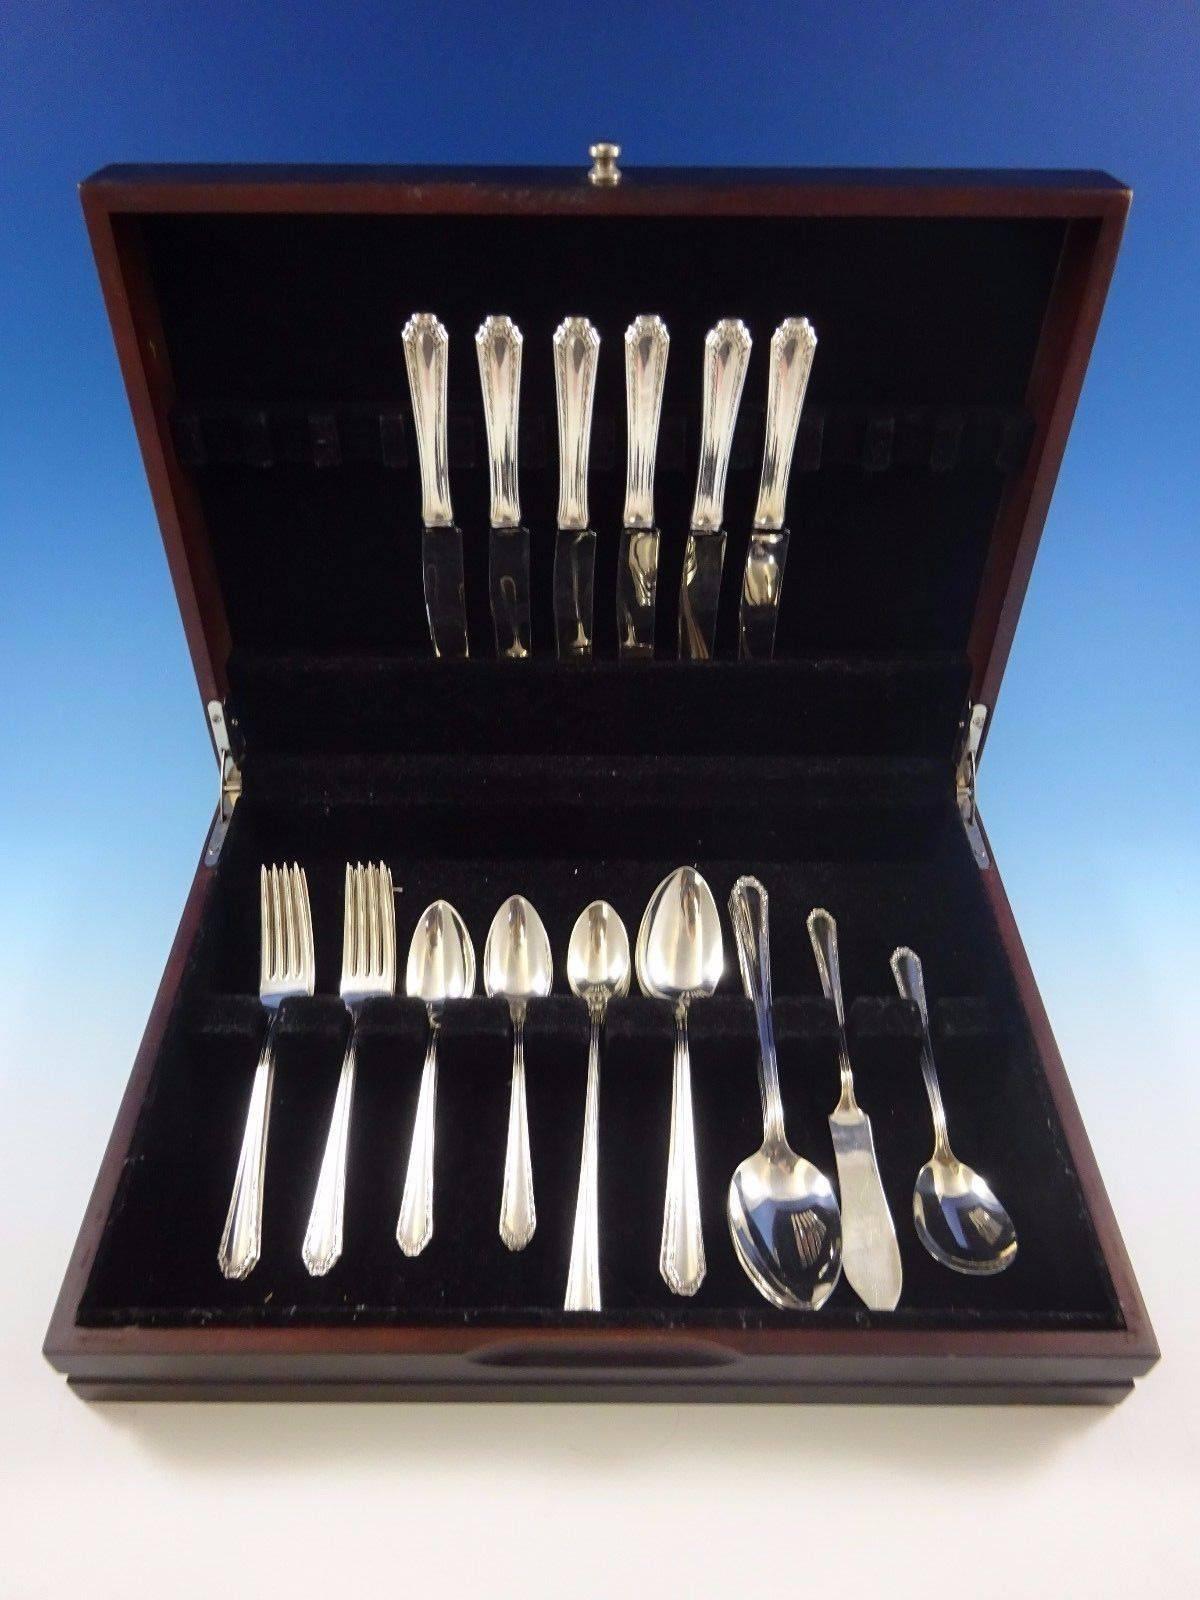 Marianne by National sterling silver flatware set - 38 pieces. 

This set includes:

Six knives, 8 3/4